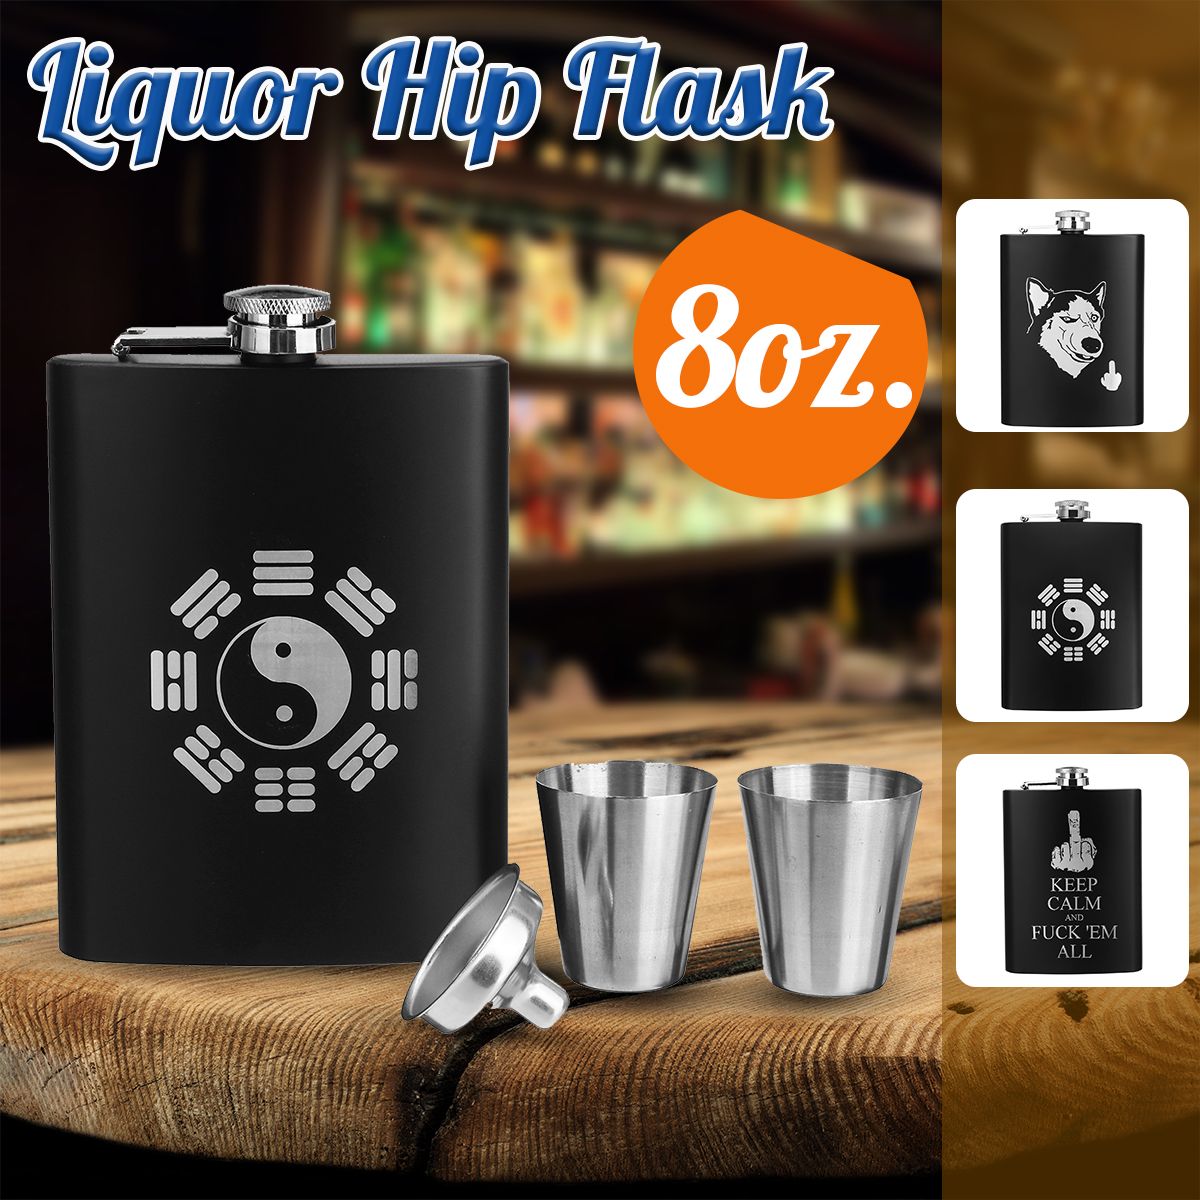 8oz-Stainless-Steel-Pocket-Liquor-Hip-Flask-Drink-Flagon-with-Funnel-1582092